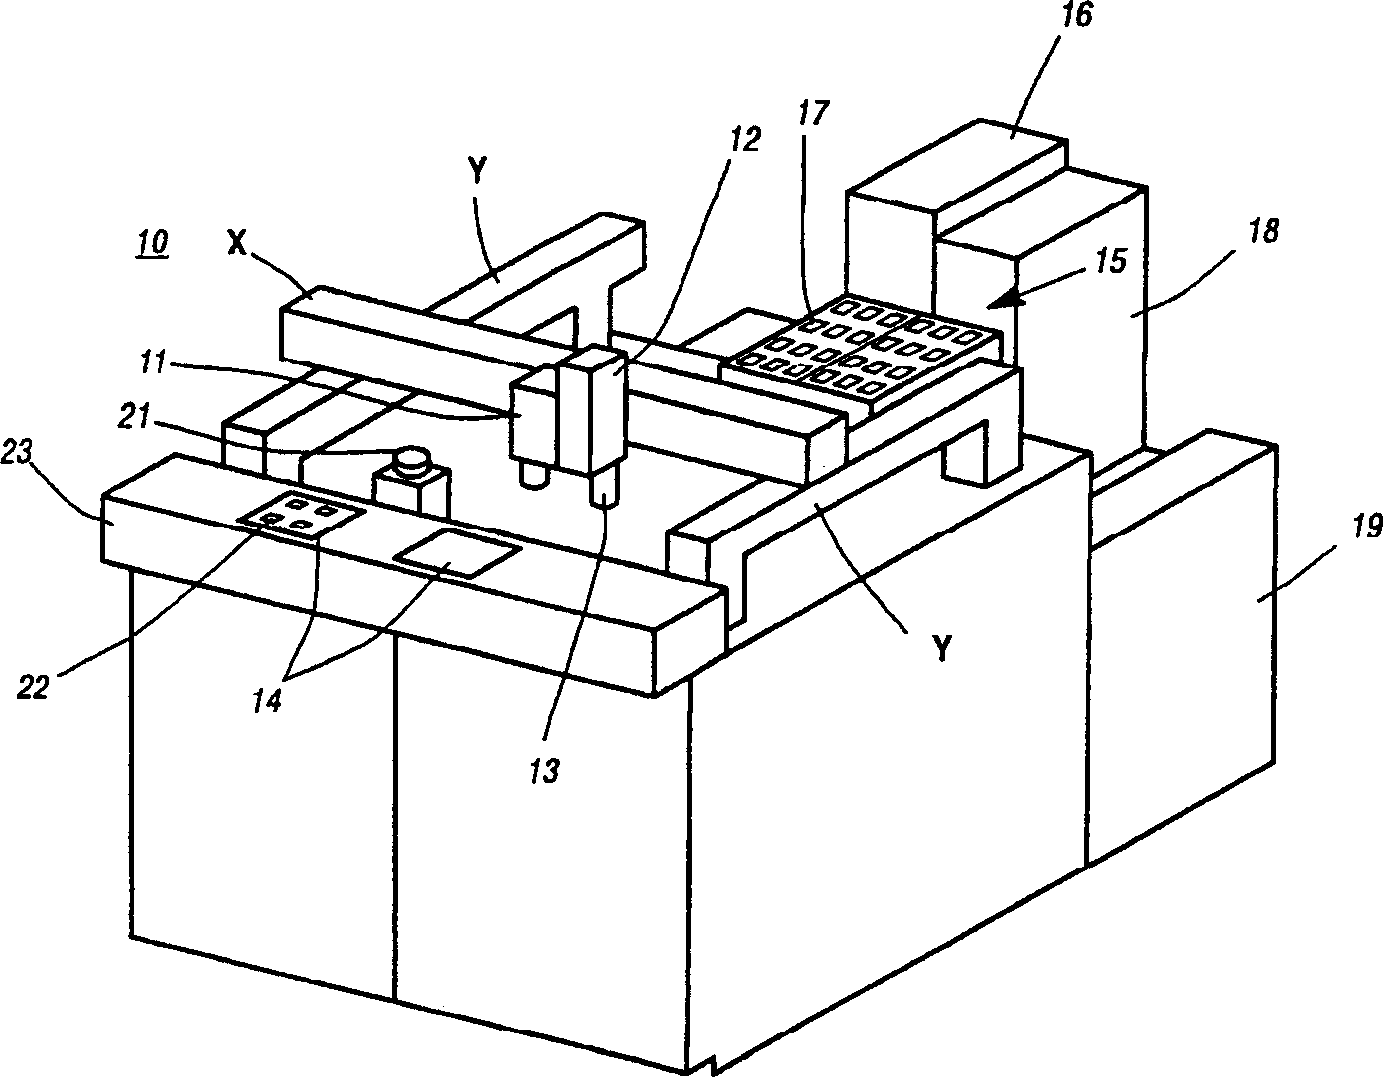 Method for positioning on base and placing view-point characteristic of semiconductor piece